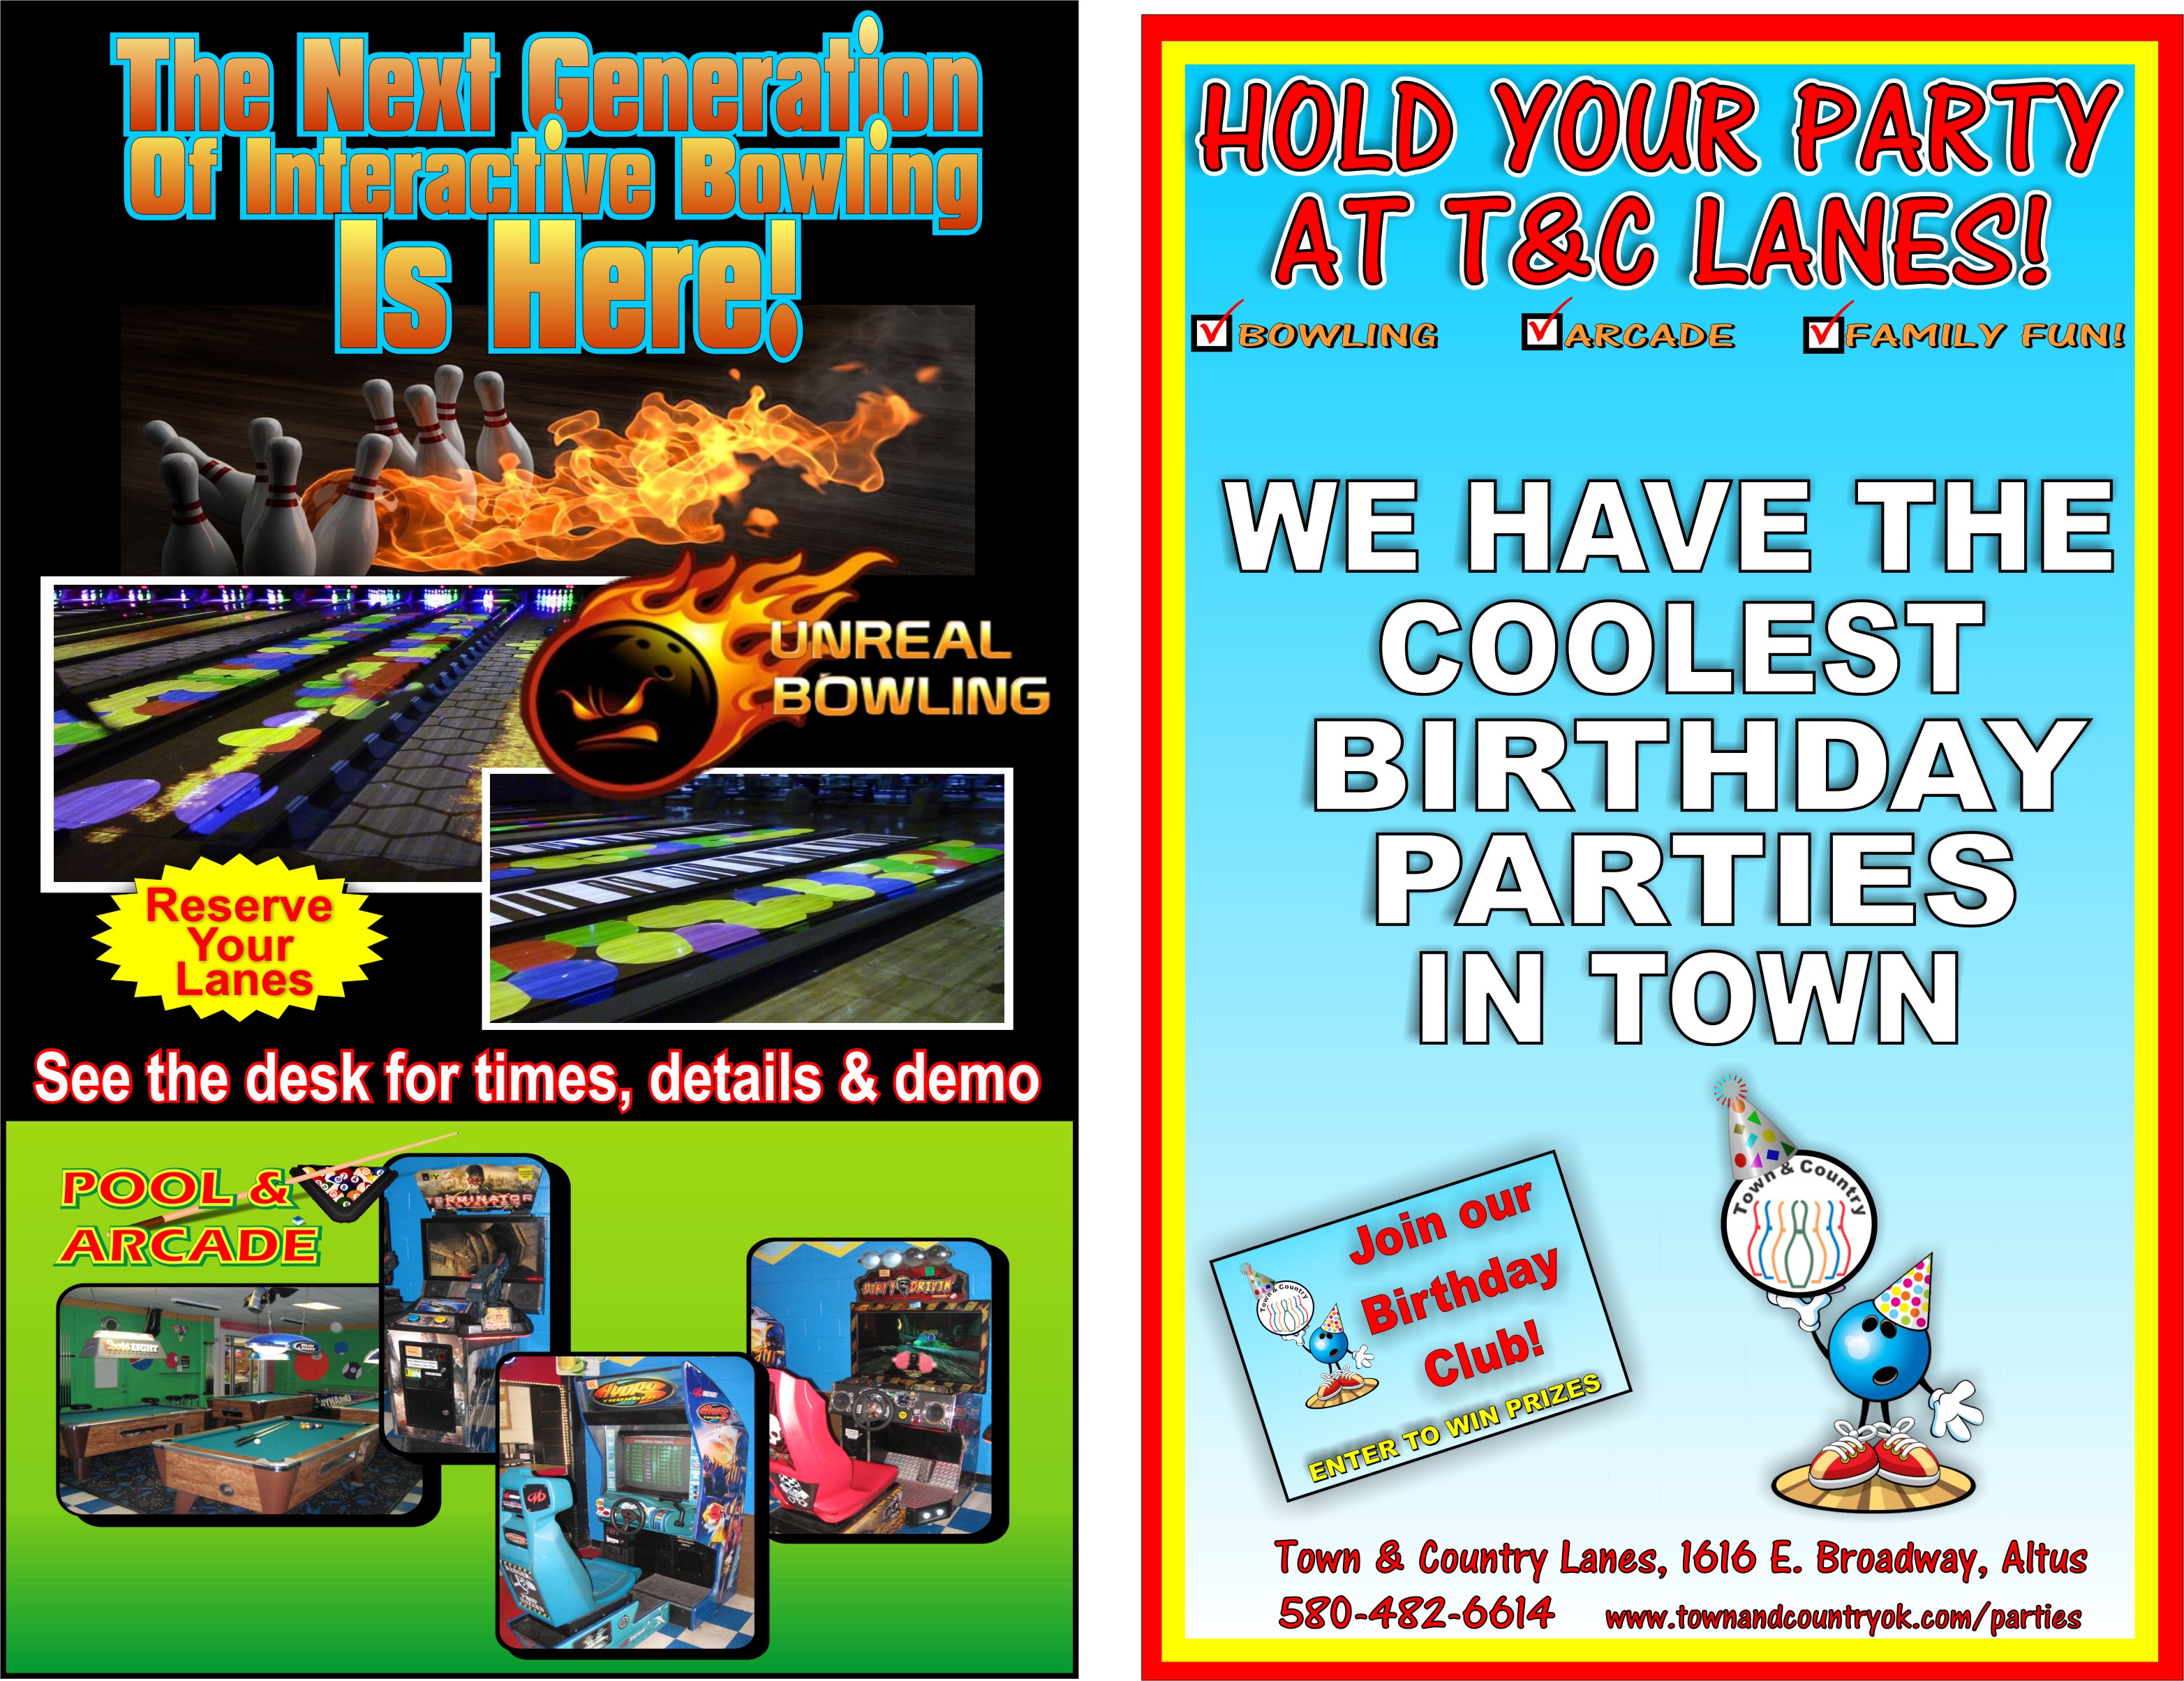 town & country lanes > parties > party planning info